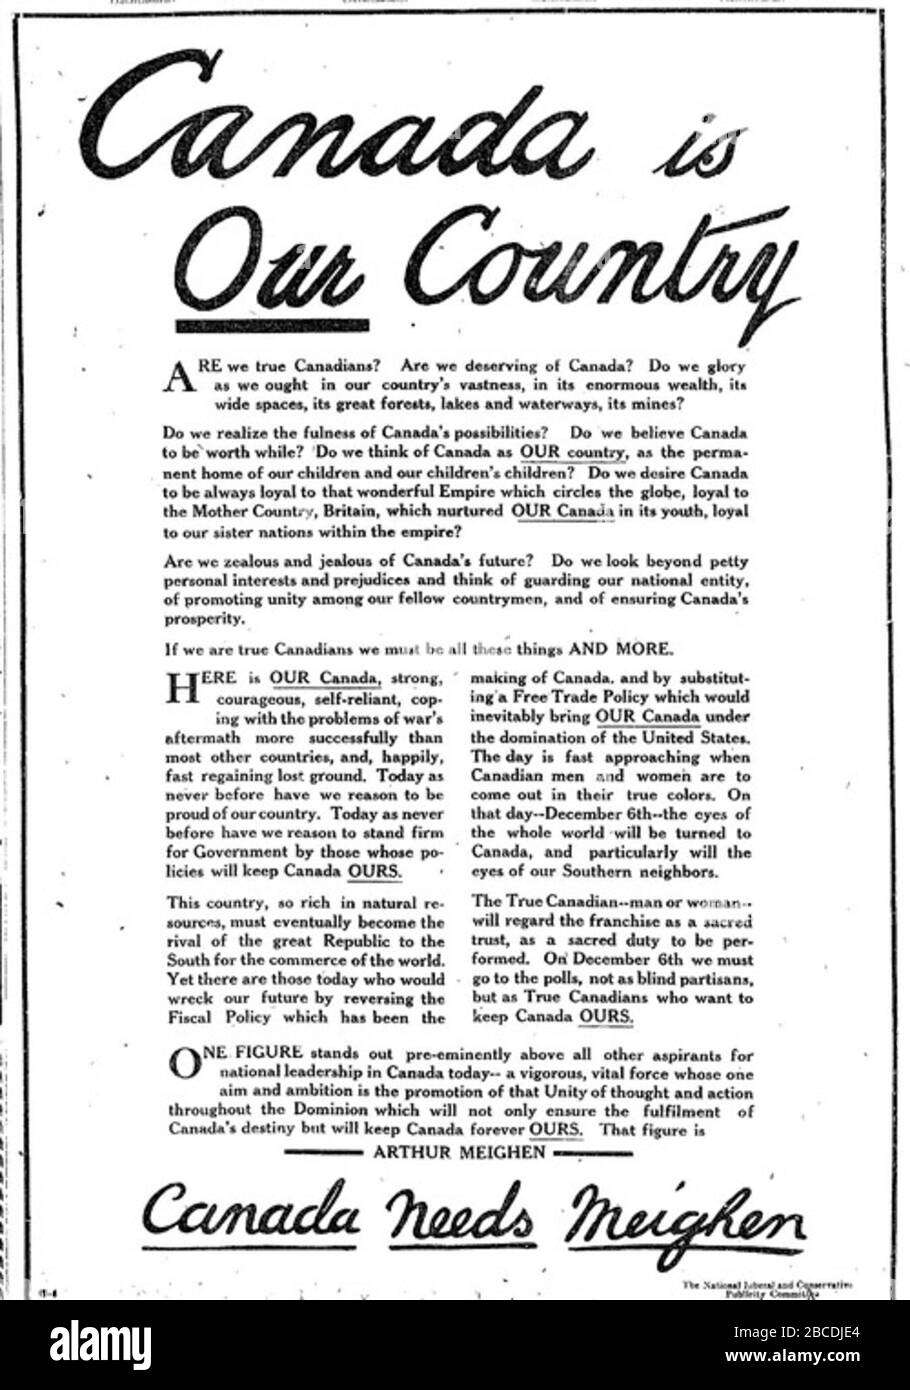 'English: Advertisement in the Toronto Daily Star: Canada is Our Country (and needs Meighen).  The ad was published the day before the 1921 federal election, promoting the Unionist Party lead by Arthur Meighen, a coalition of Conservatives and pro-conscription Liberals formed by Sir Robert Borden during the First World War.  Meighen attempted to make the Unionist party a permanent alliance of Tories and Liberals by renaming it the National Liberal and Conservative Party, but this name change failed, and most Unionist Liberals either returned to the Liberal fold or joined the new Progressive Pa Stock Photo